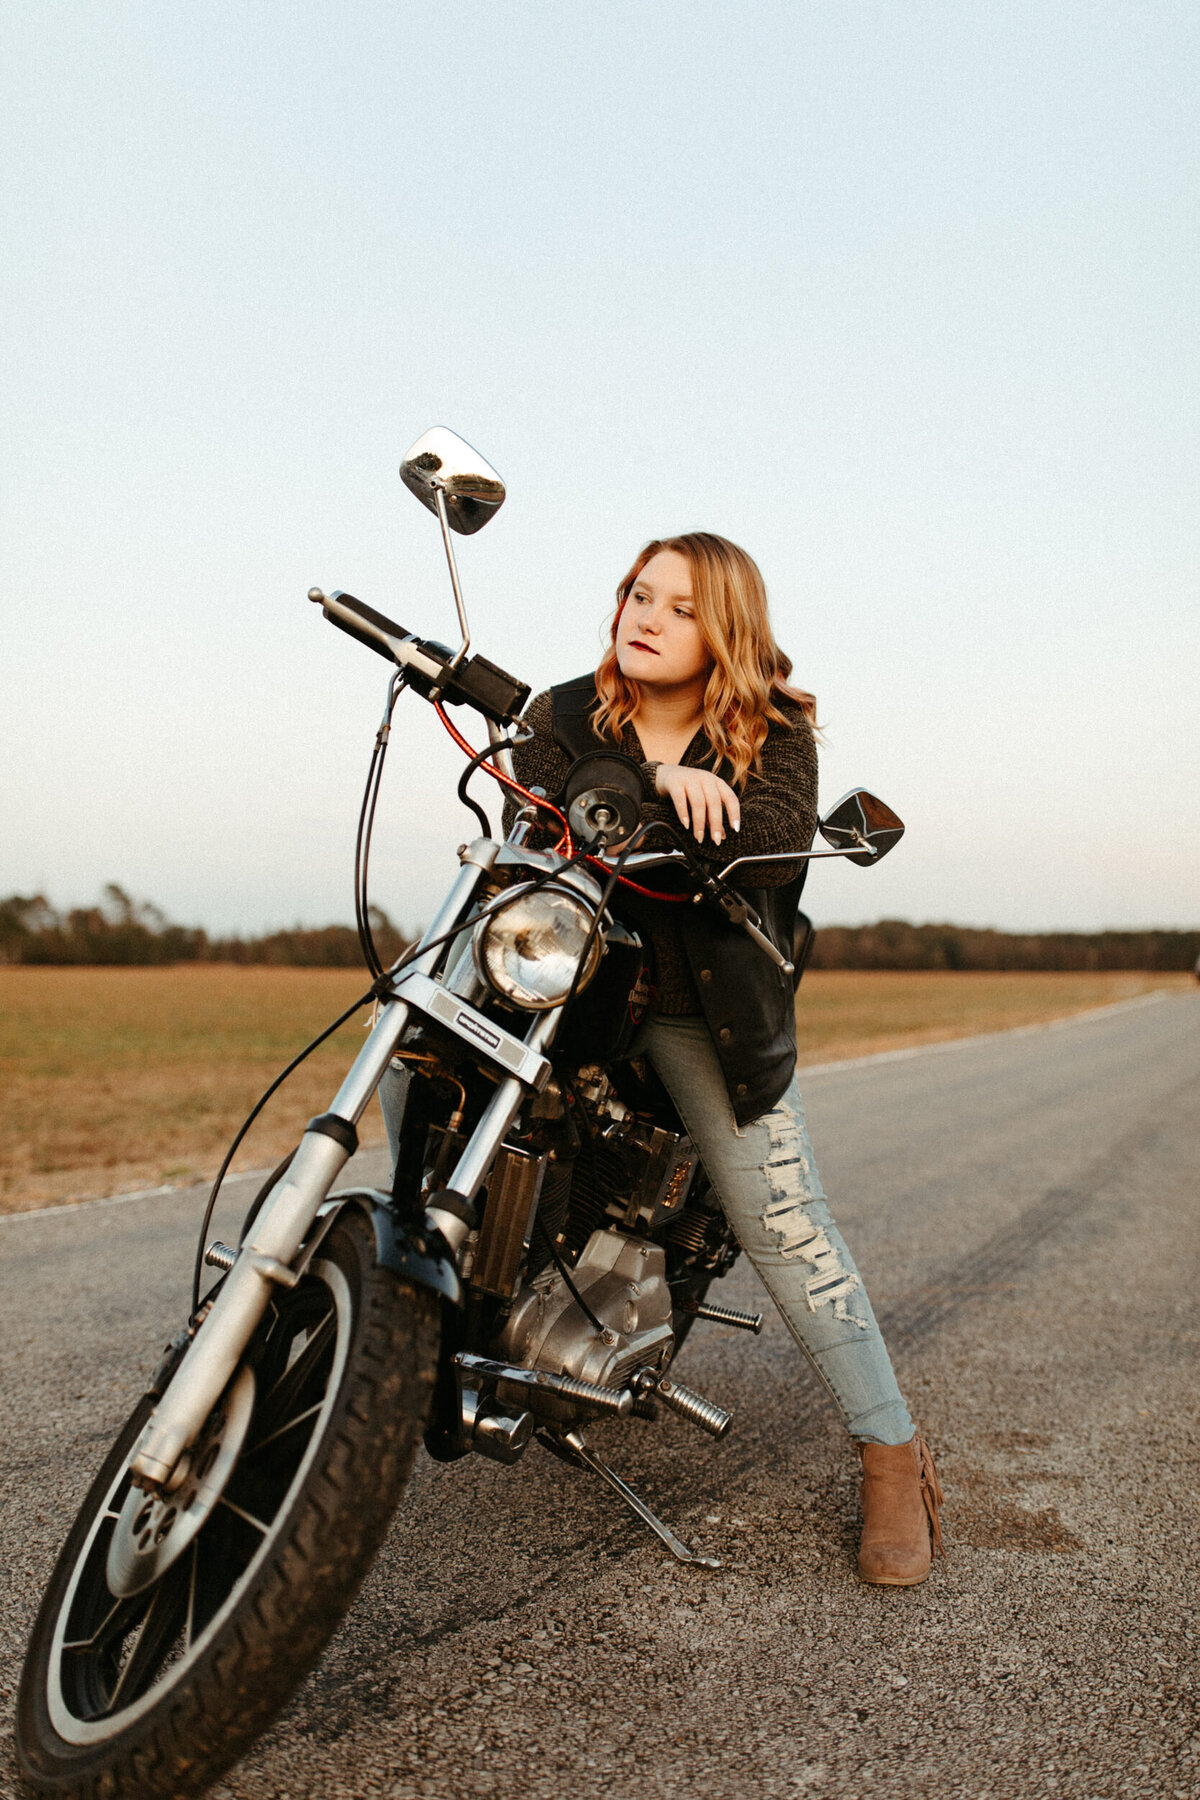 High school senior posing on a motorcycle in the road